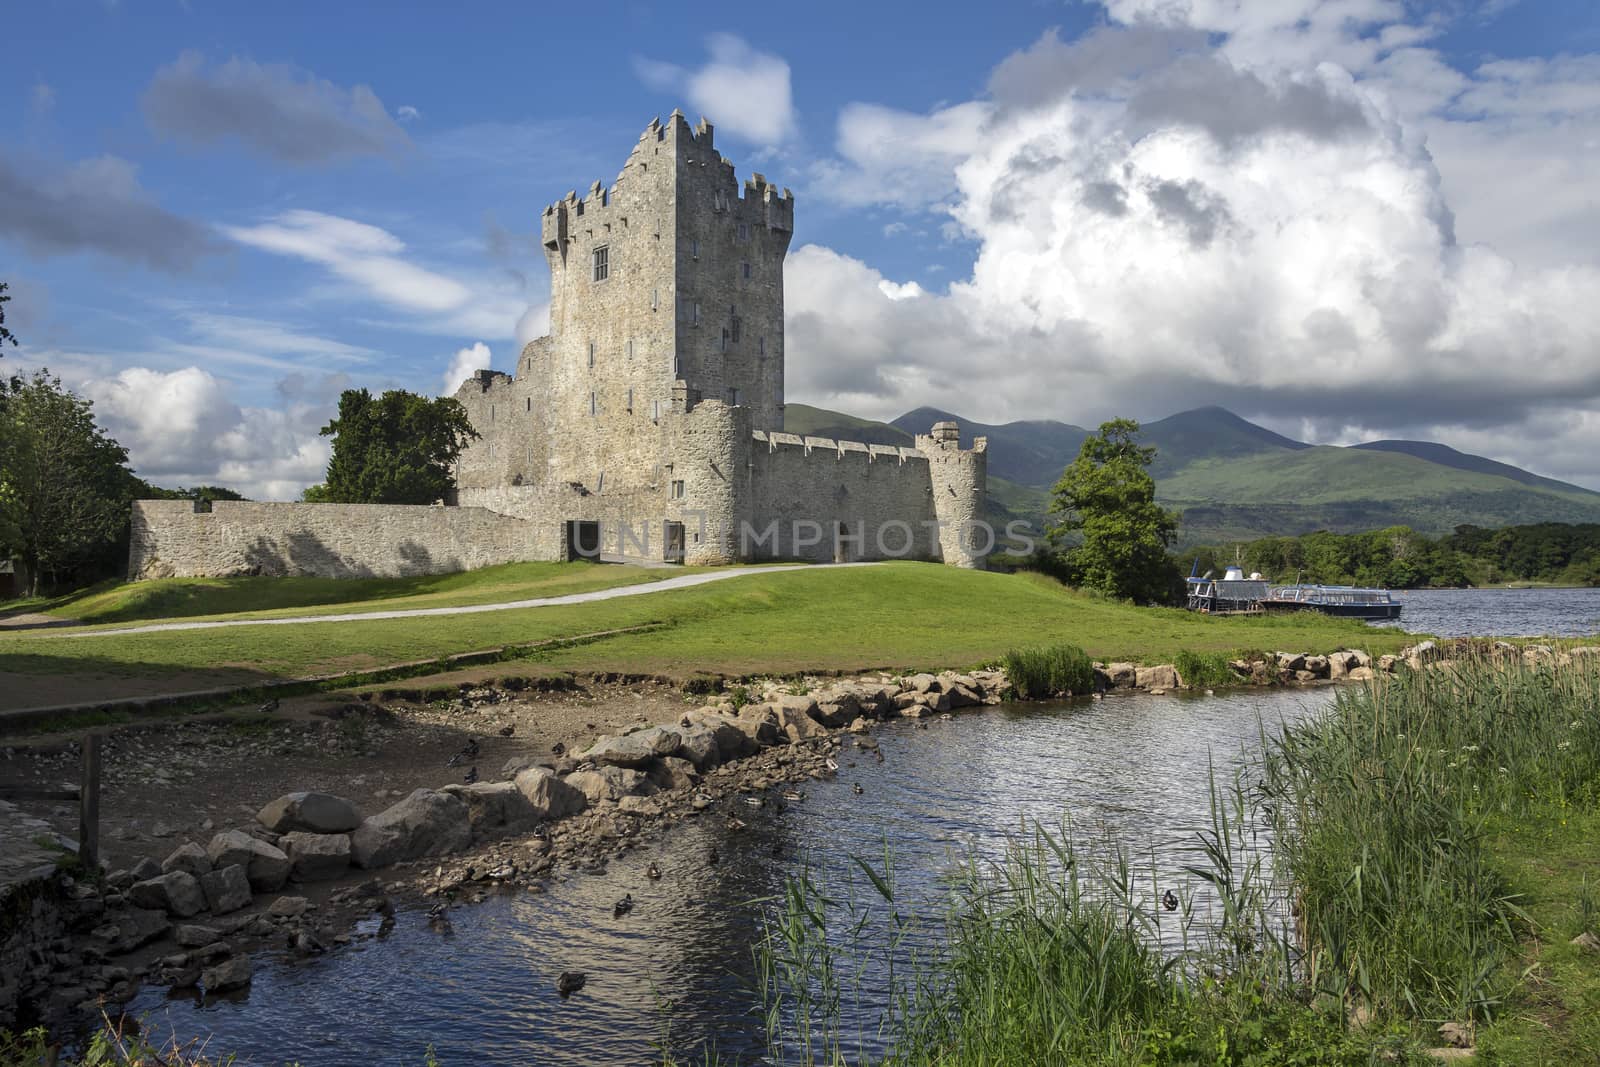 Ross Castle is a 15th-century tower house and keep on the edge of Lough Leane, in Killarney National Park, County Kerry in the Republic of Ireland It is the ancestral home of the O'Donoghue clan.